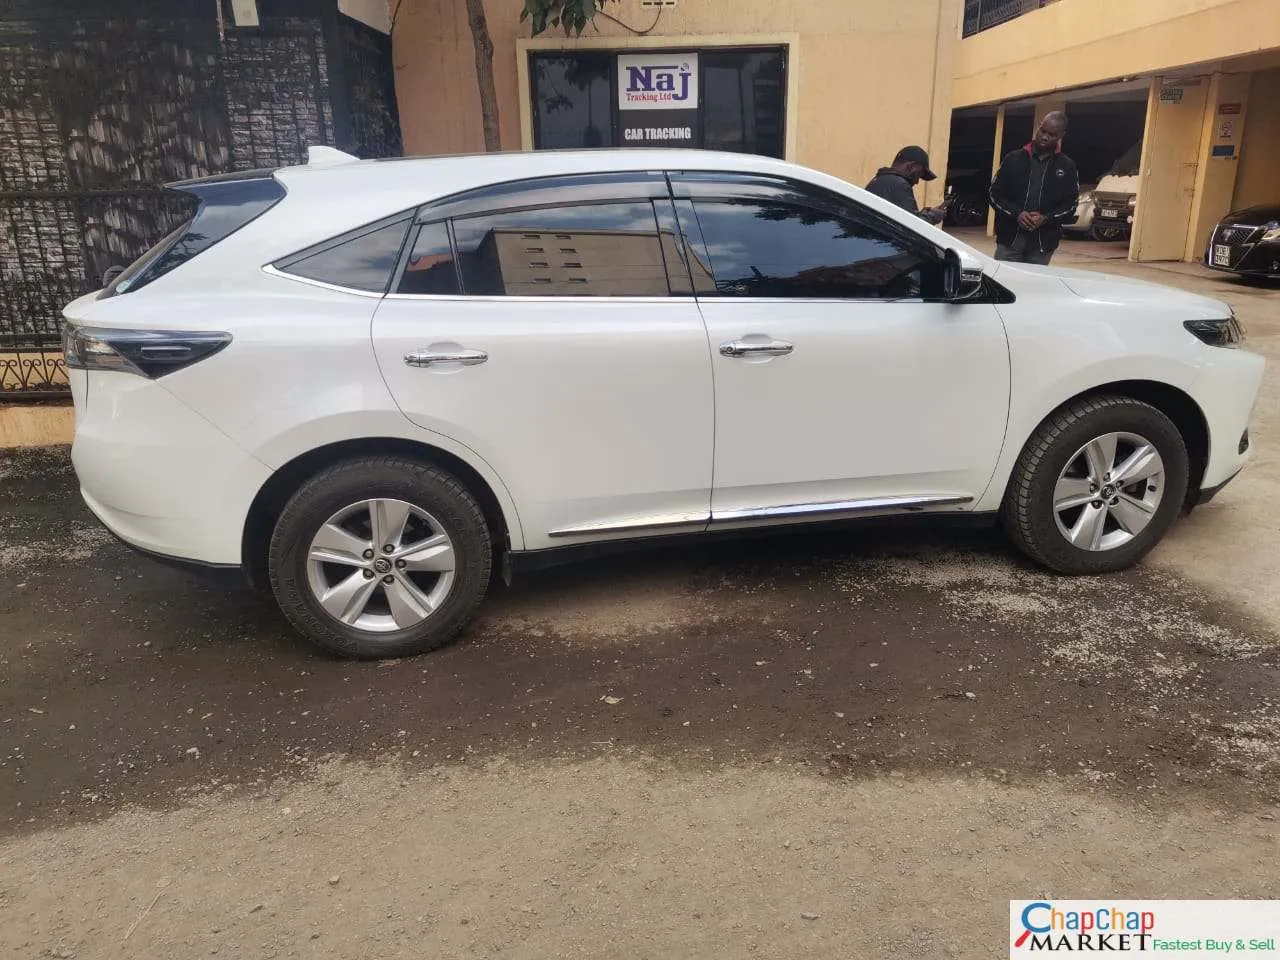 Cars Cars For Sale/Vehicles-Toyota Harrier for sale in Kenya with sunroof You Pay 30% Deposit Trade in OK EXCLUSIVE 7